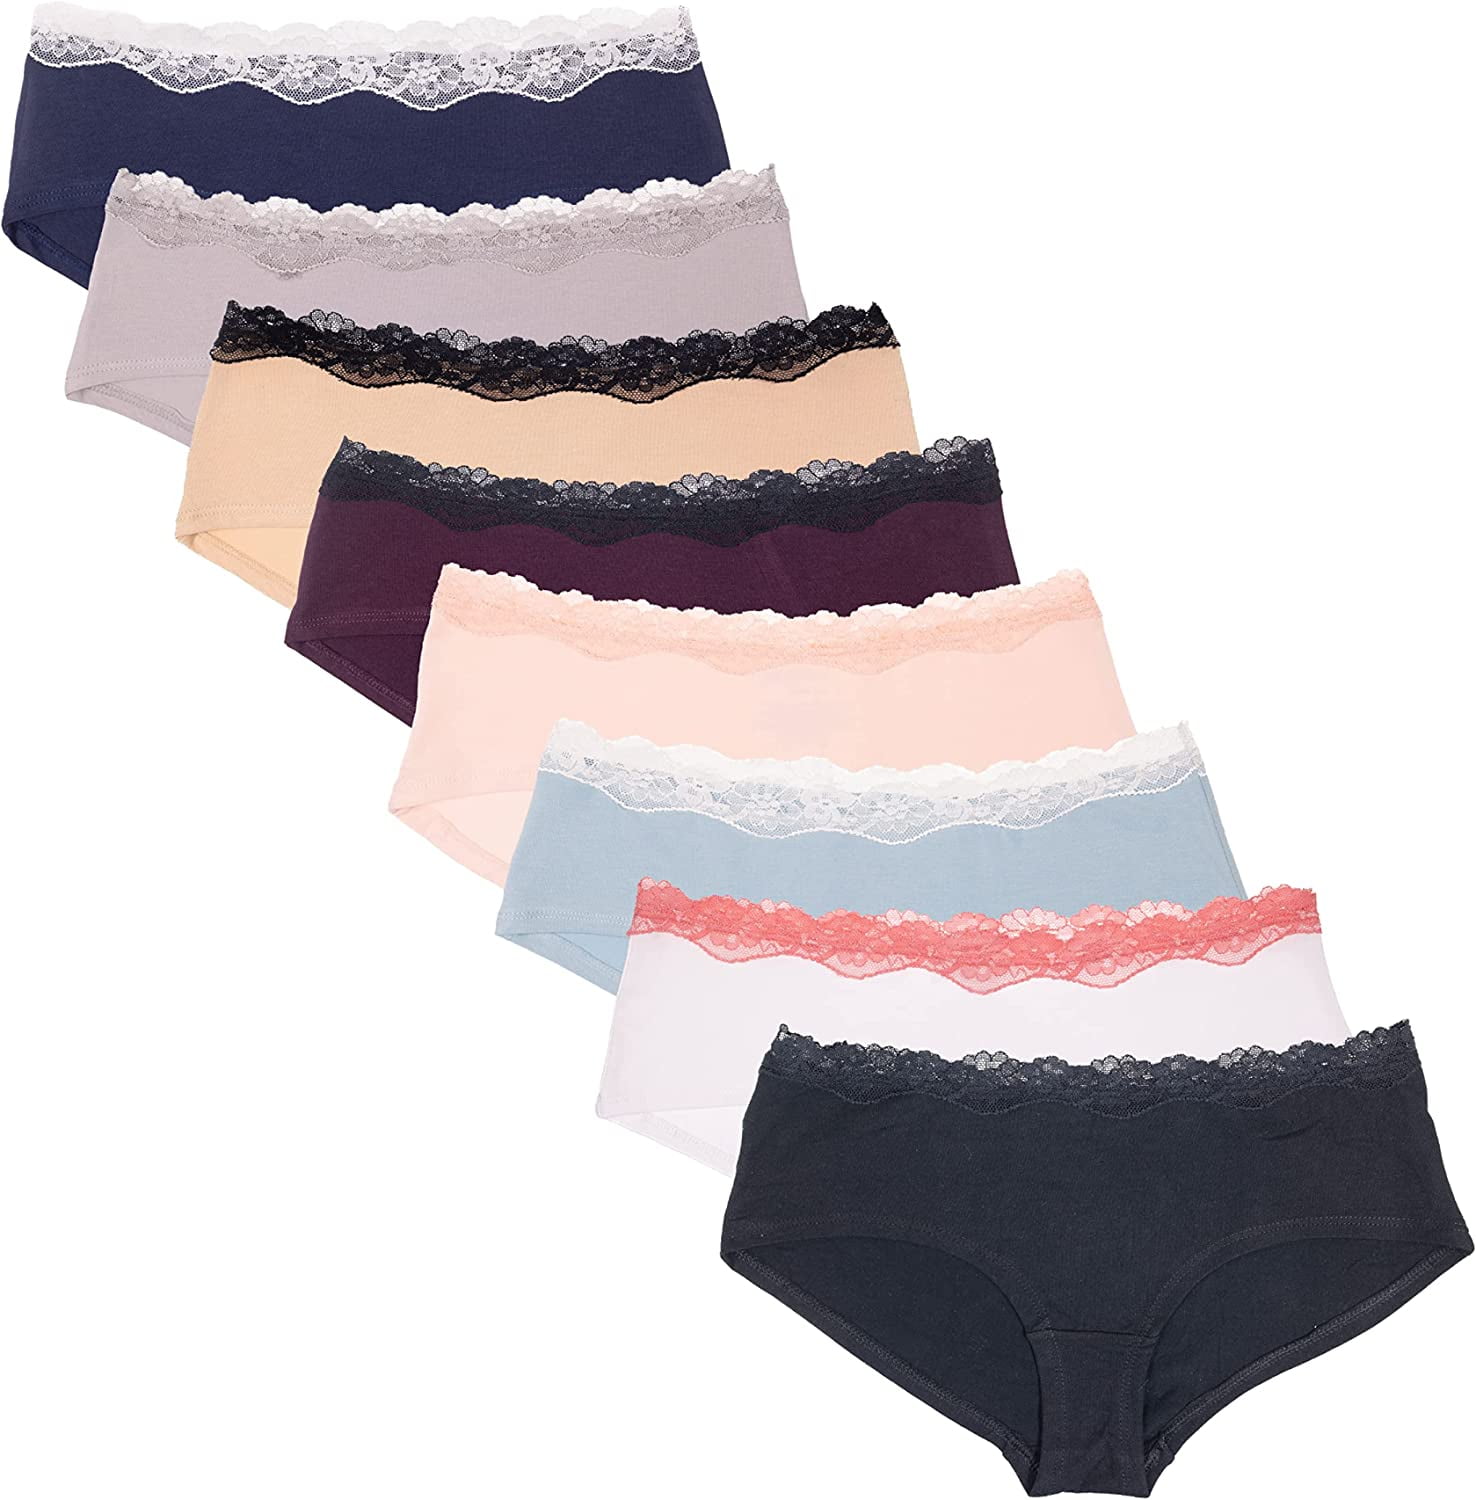 Buy DISOLVE Women's Underwear Hipster Panties Cotton High Rise Briefs Plus  Size (38 Till 42) 4XL Pack of 3 Assorted Color at